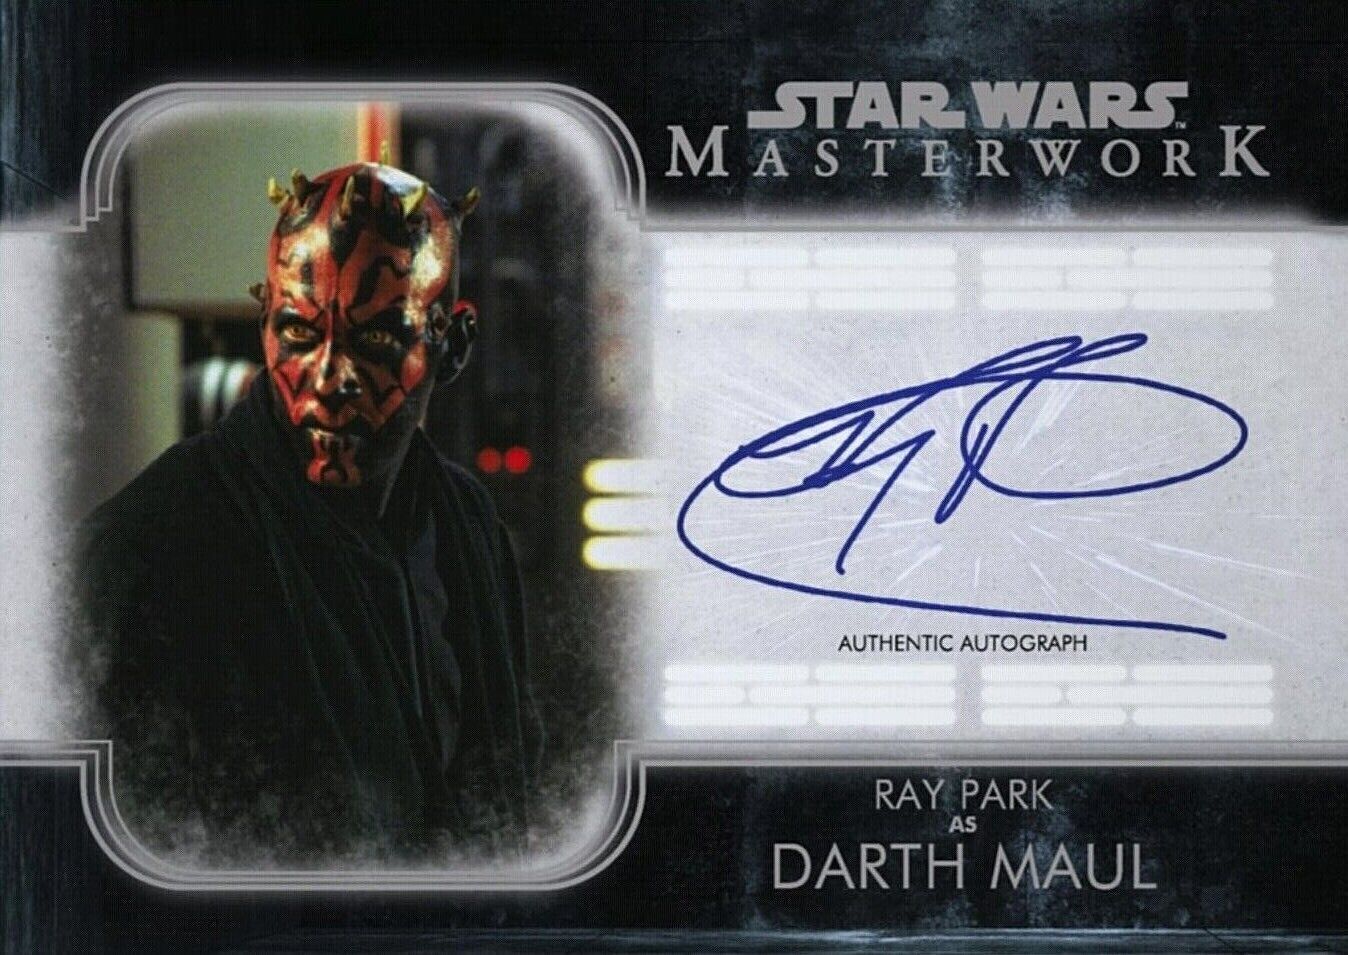 Topps Star Wars MW RAY PARK Authentic Autograph as DARTH MAUL SIG Digital Card